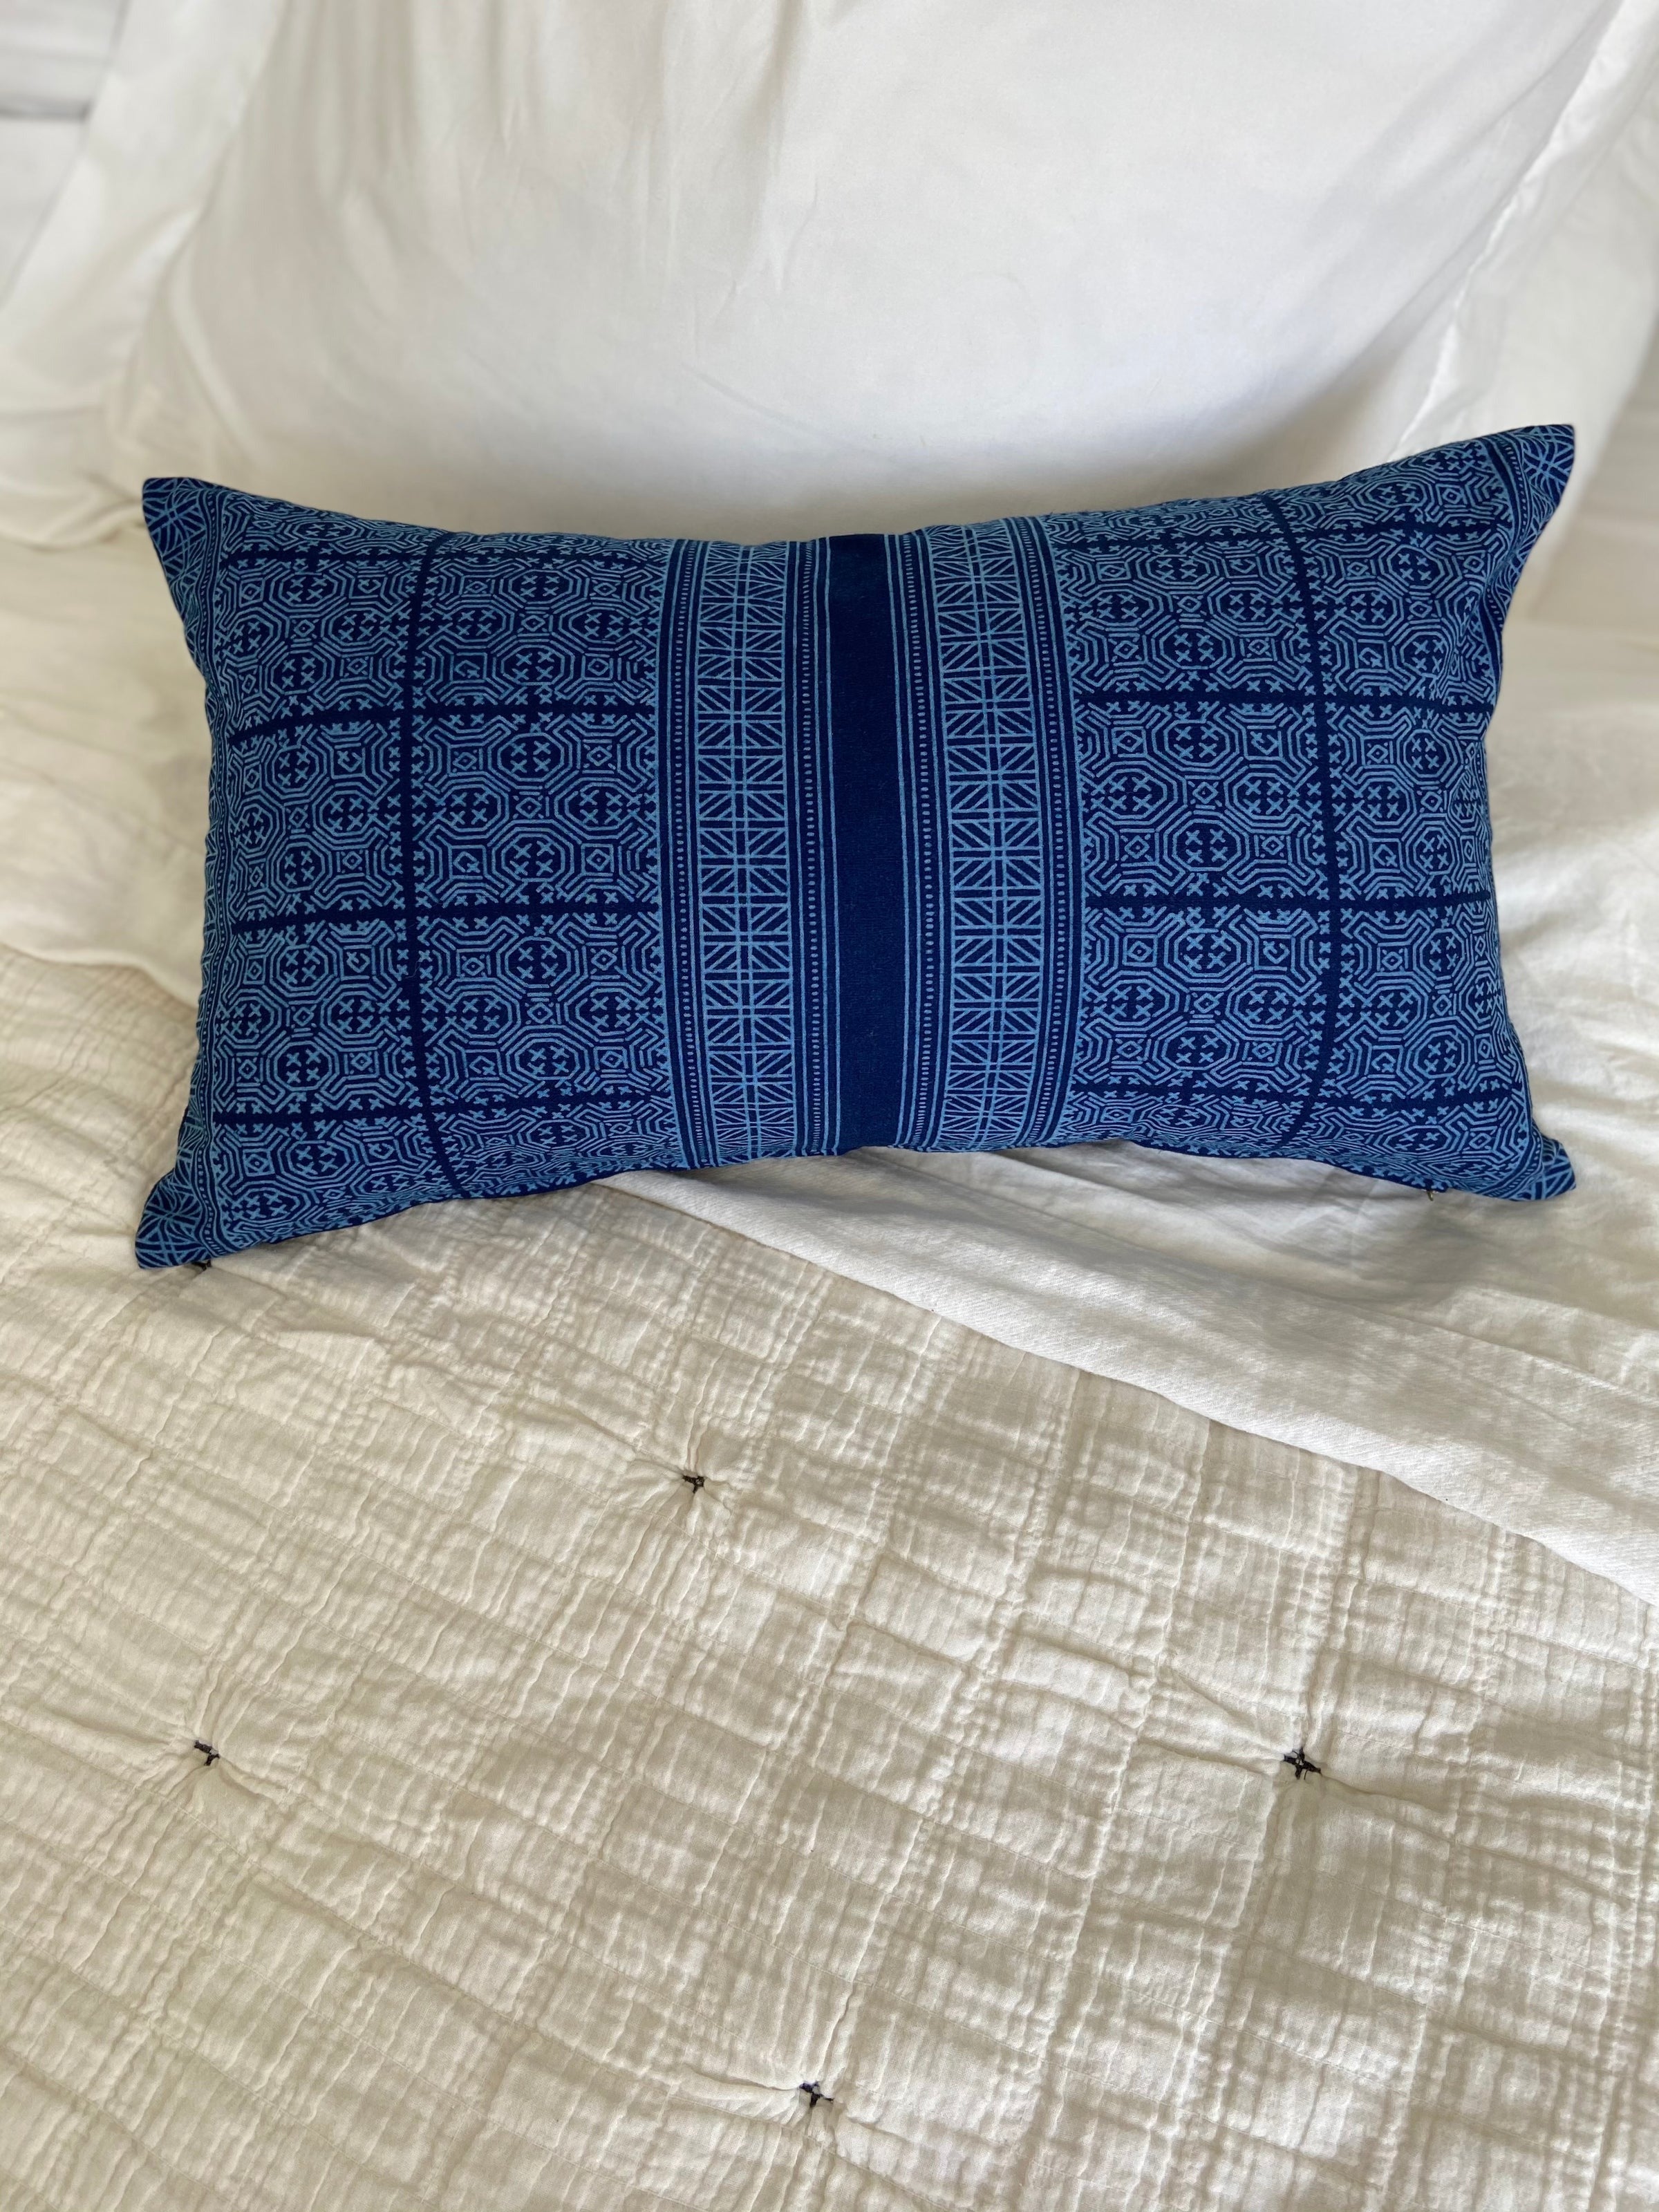 Indigo & Juniper lumbar and square pillow covers used outside.